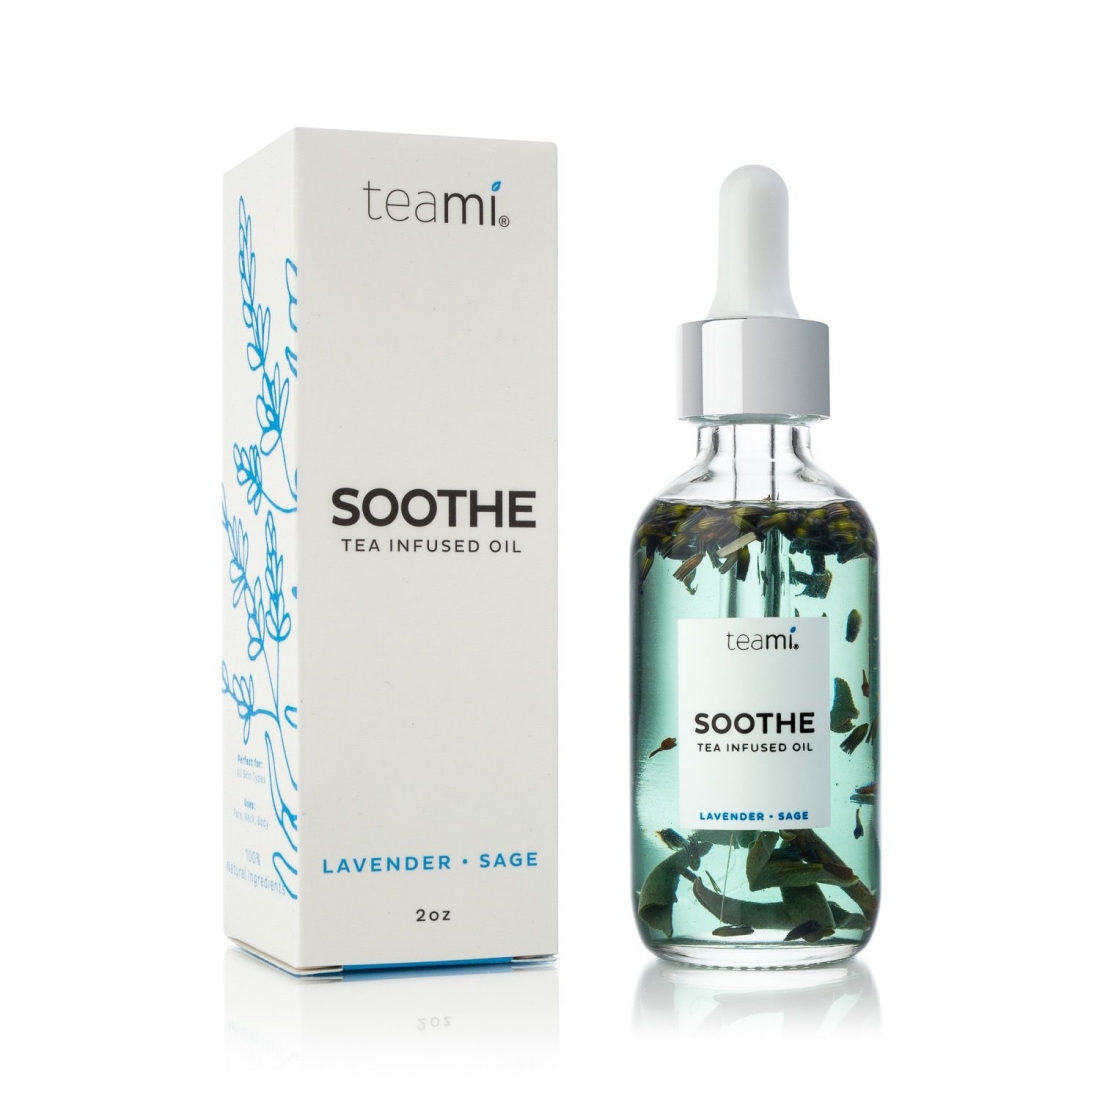 'Soothe Tea Infused' Facial Oil